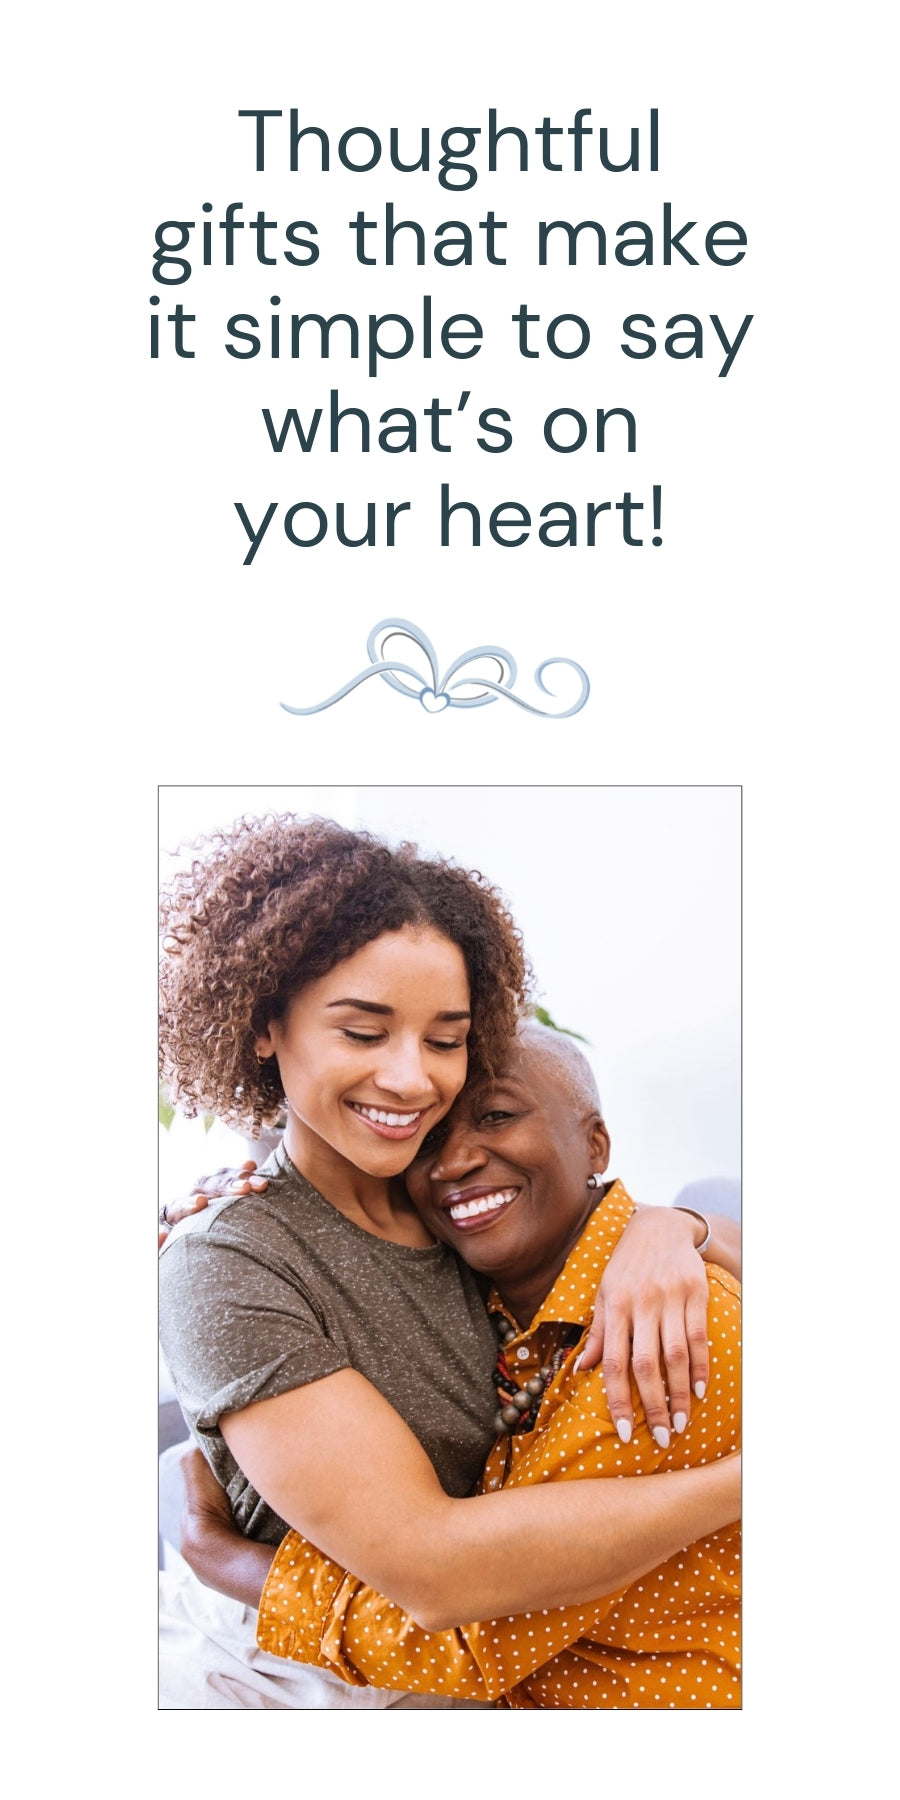 The Grandparent Gift Co Online Store- Thoughtful Gifts That Say What's on Your Heart